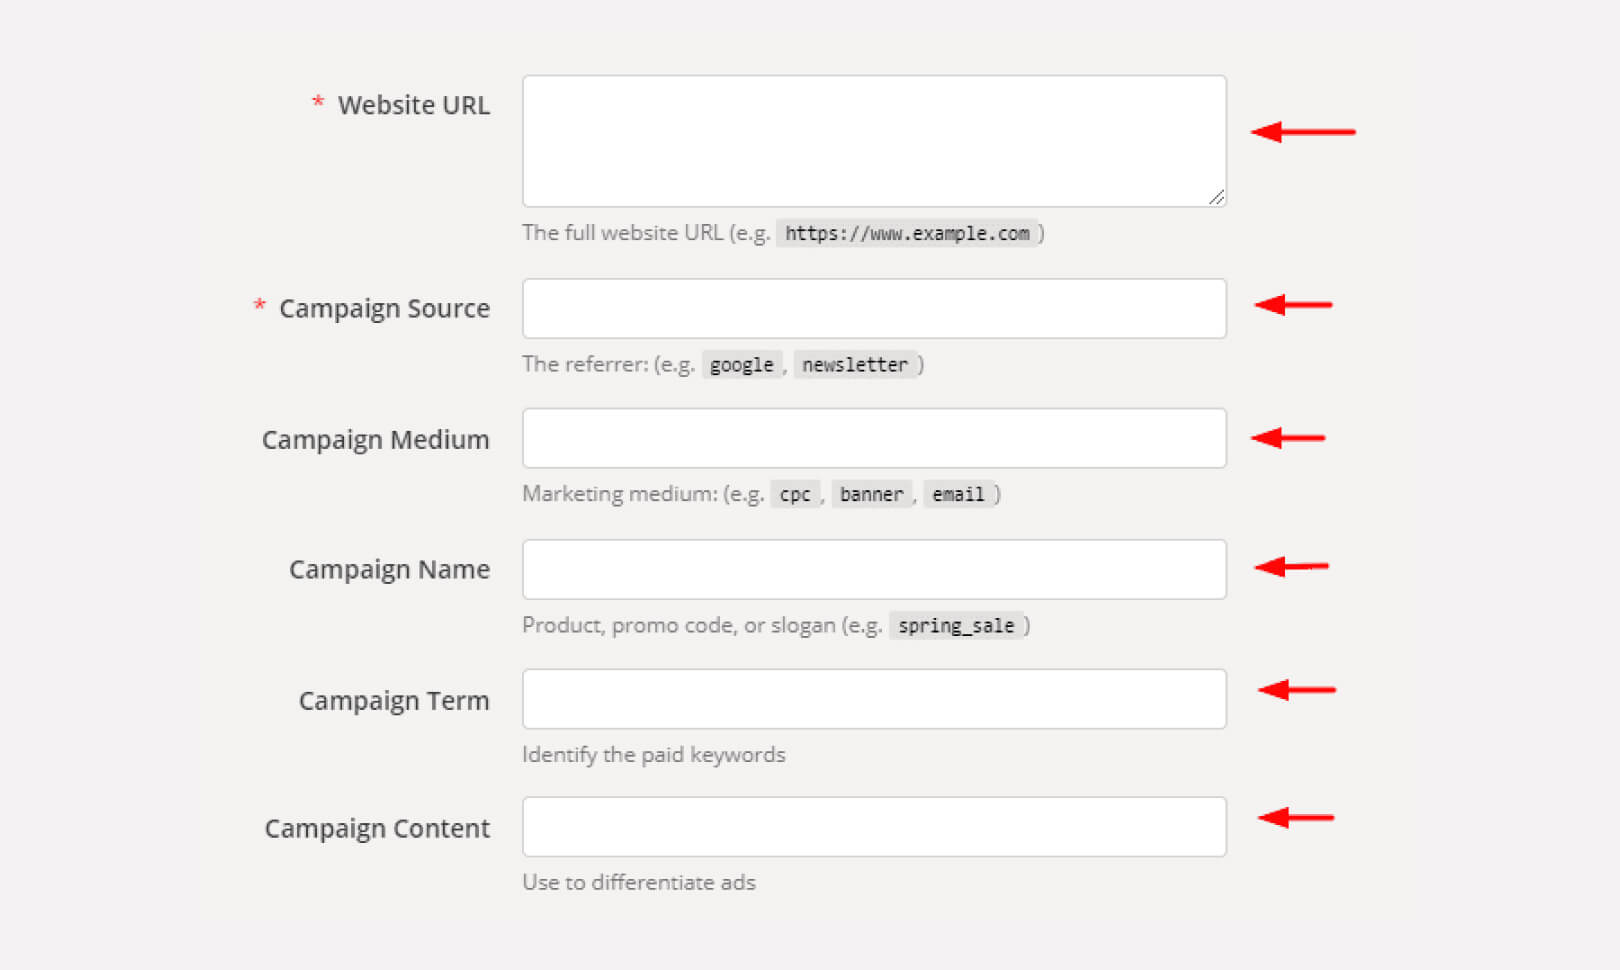 How to Use Google’s Campaign URL Builder